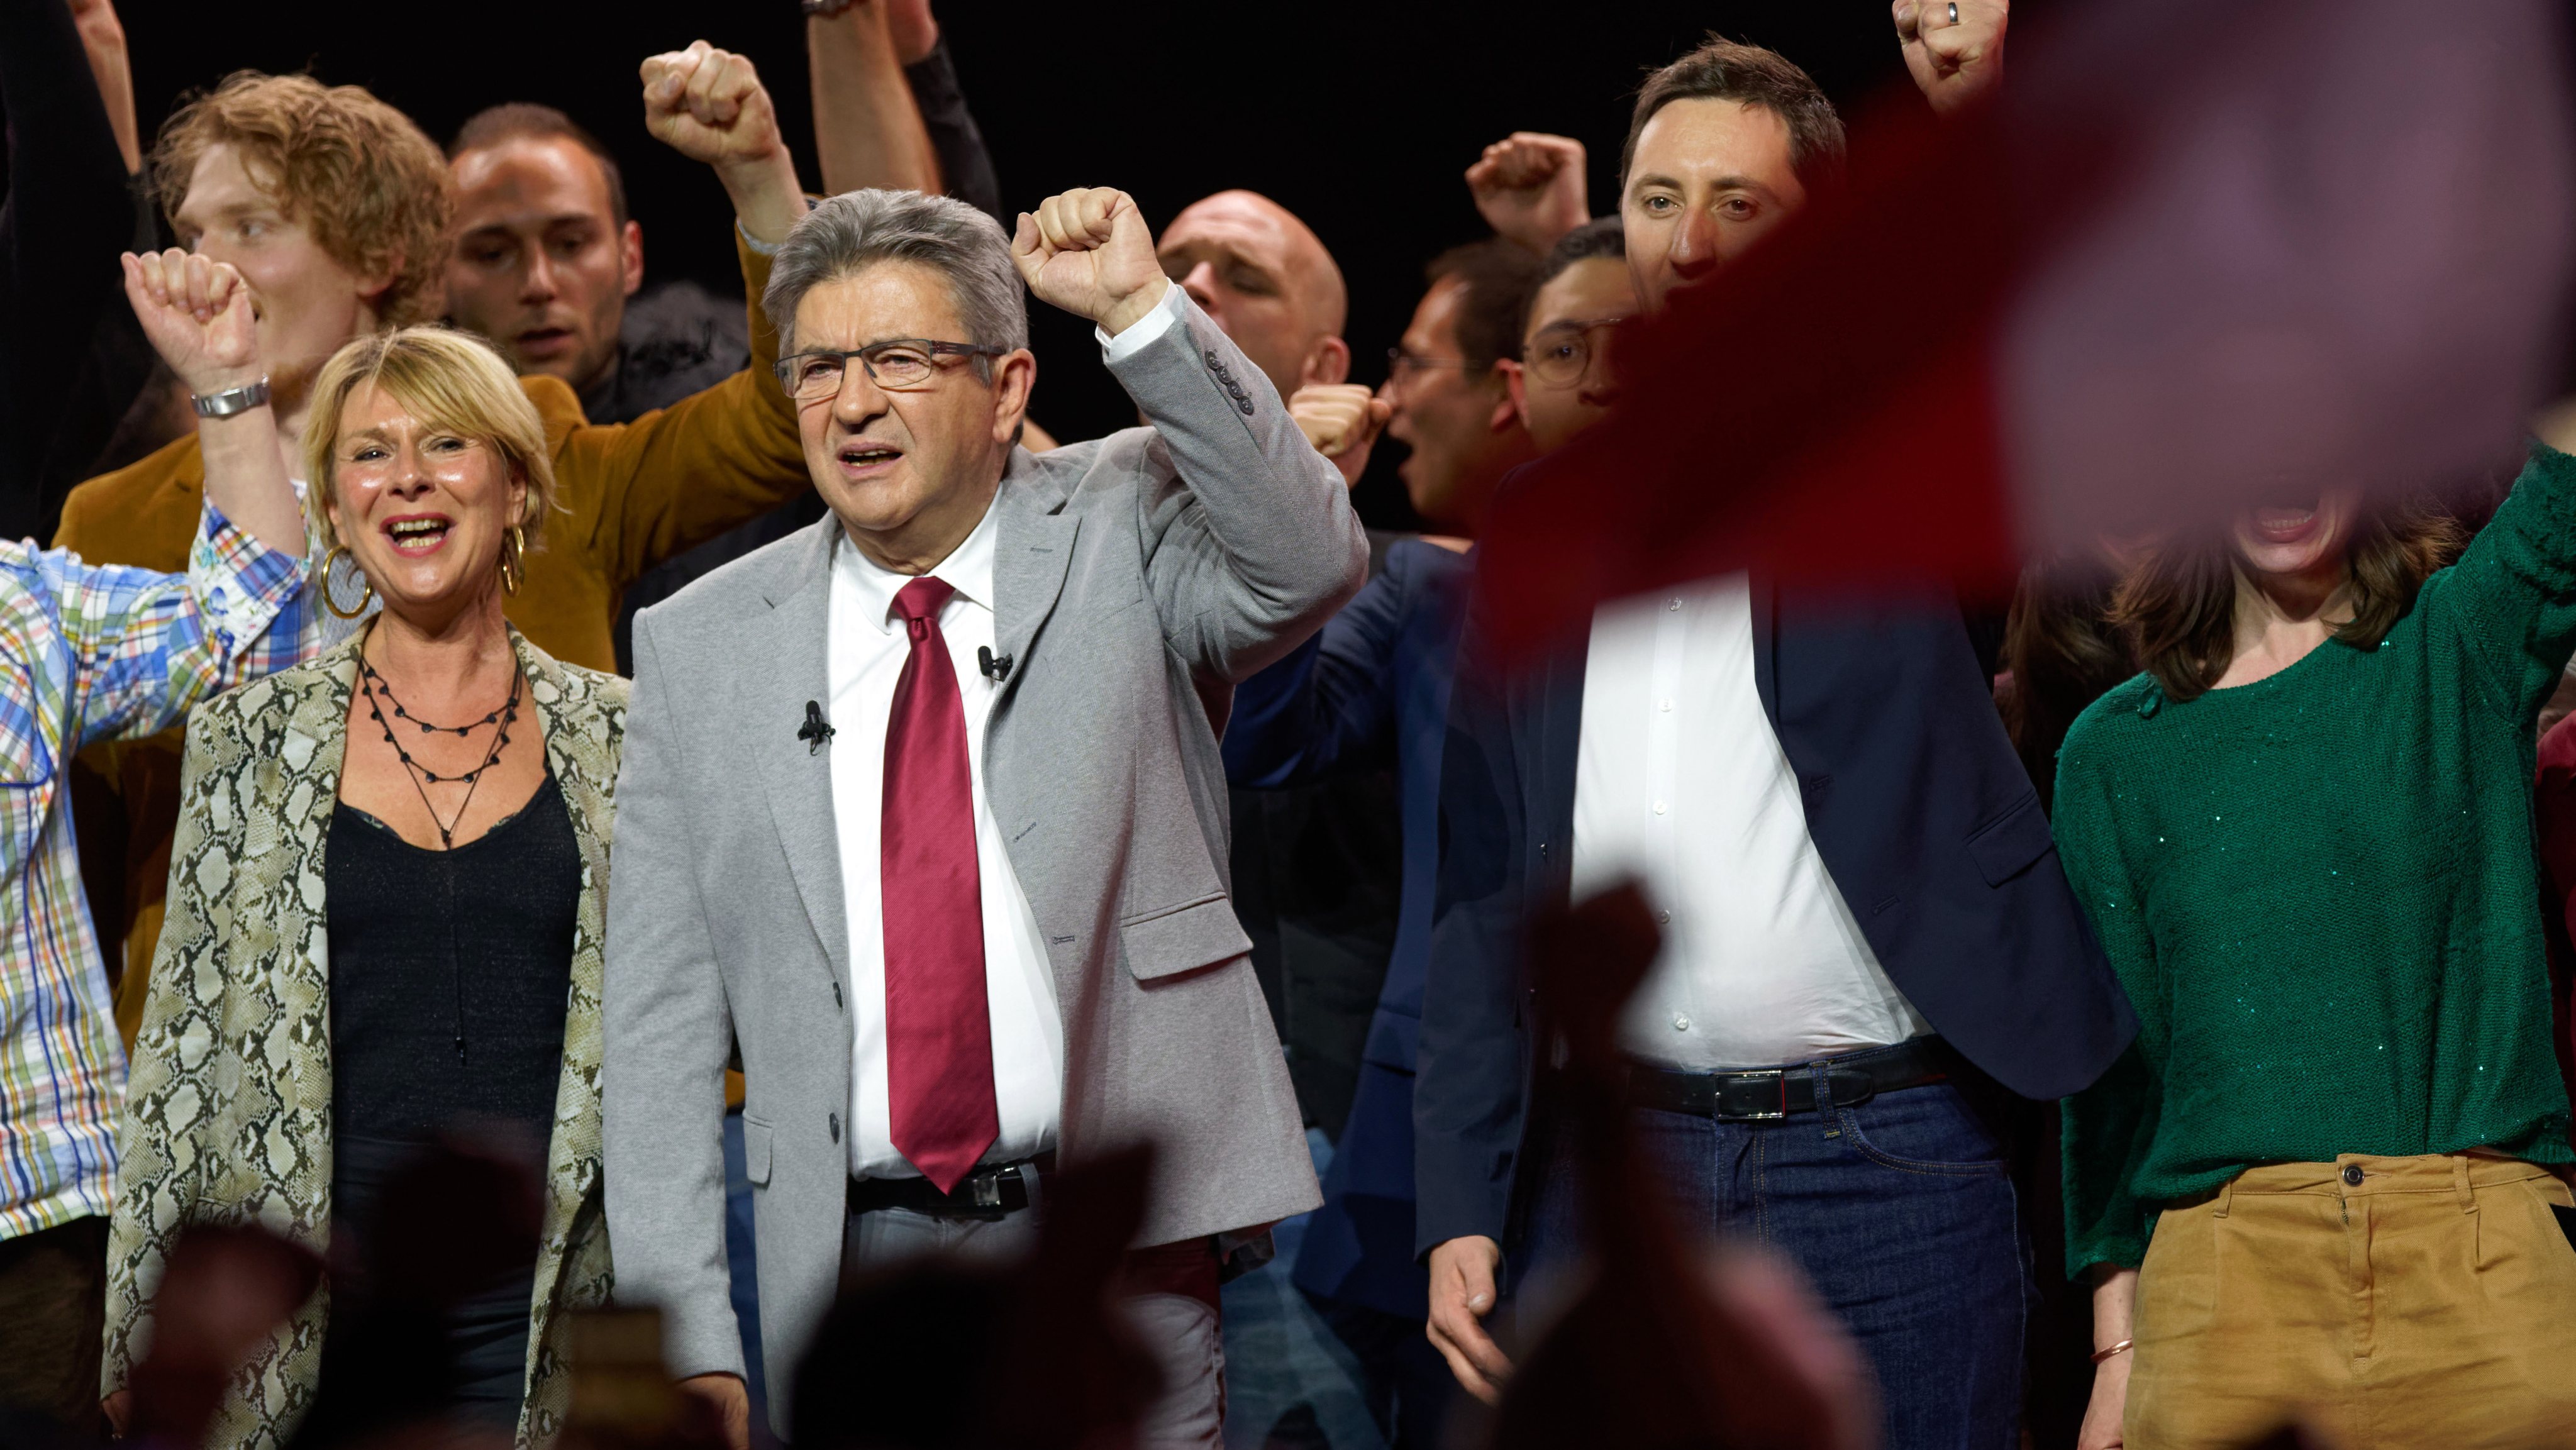 French Left-Wing Presidential Candidate Jean-Luc Melenchon At The Final Rally On The Campaign Trail